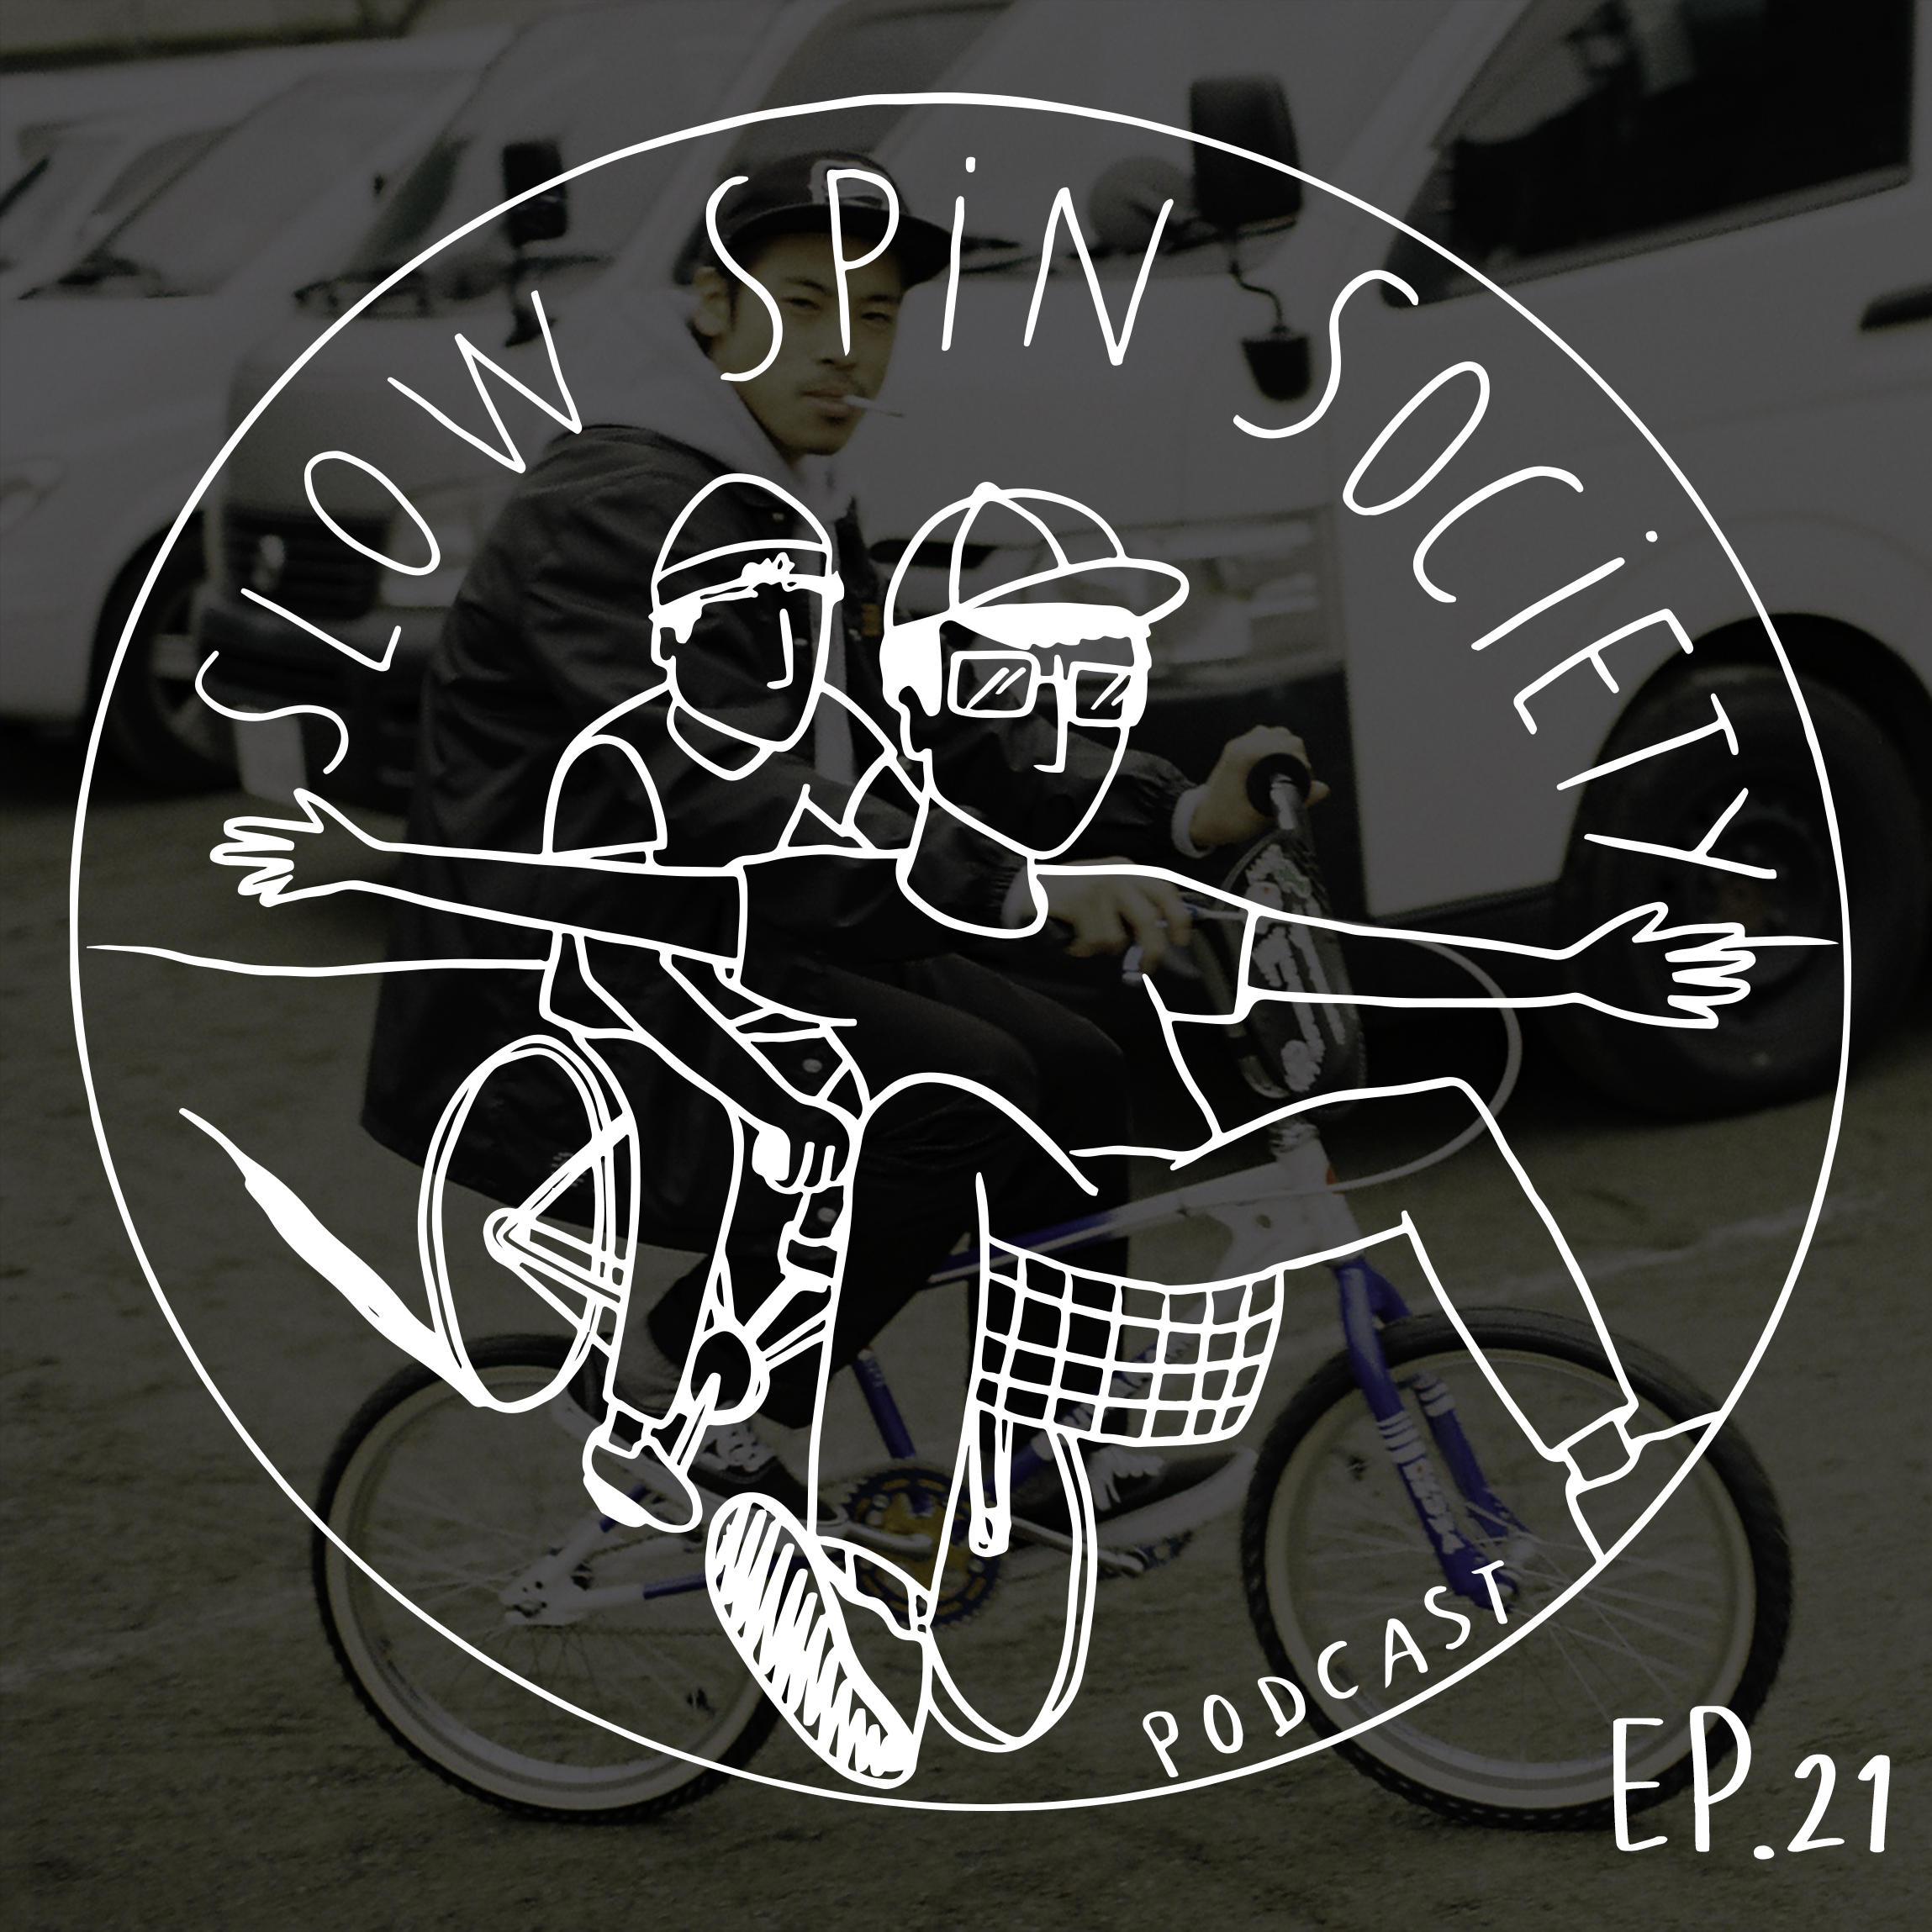 The Slow Spin Society Podcast Ep.21 : This Episode Is Not About Fixed Gear?